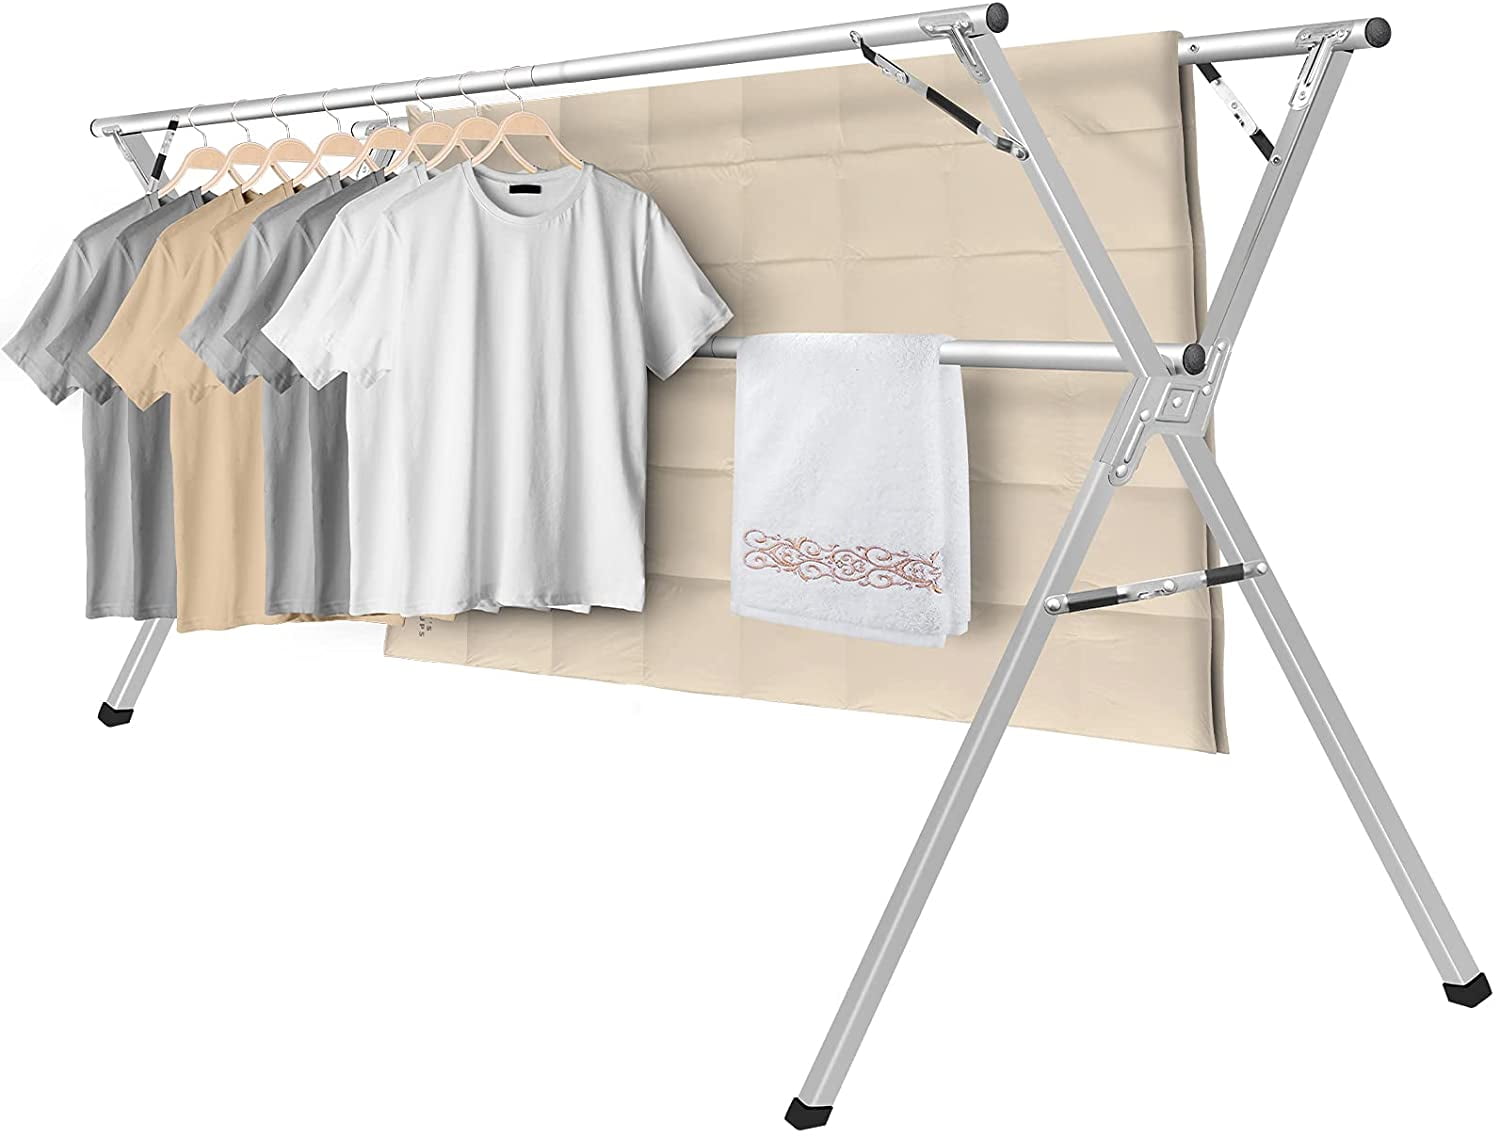 Folding Laundry Hanger Drying Rack Storage Clothes Dryer Room Heavy Duty X Frame 